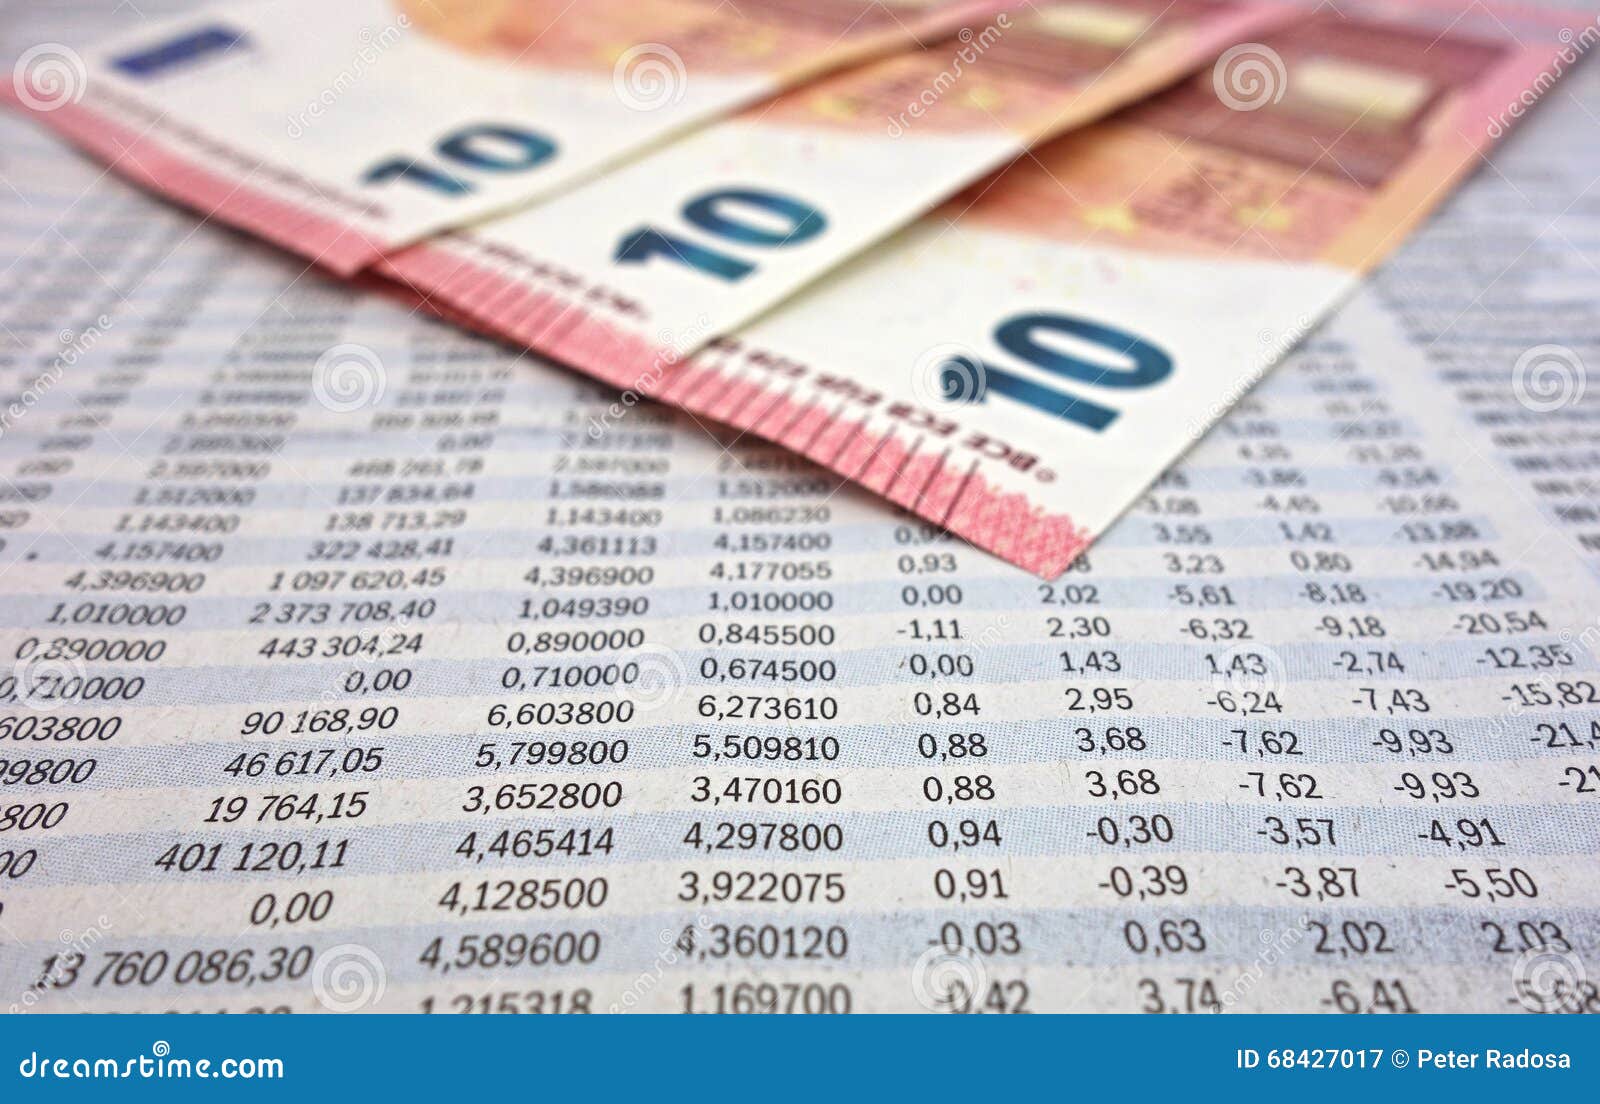 Stock market numbers stock image. Image of growth, money - 68427017